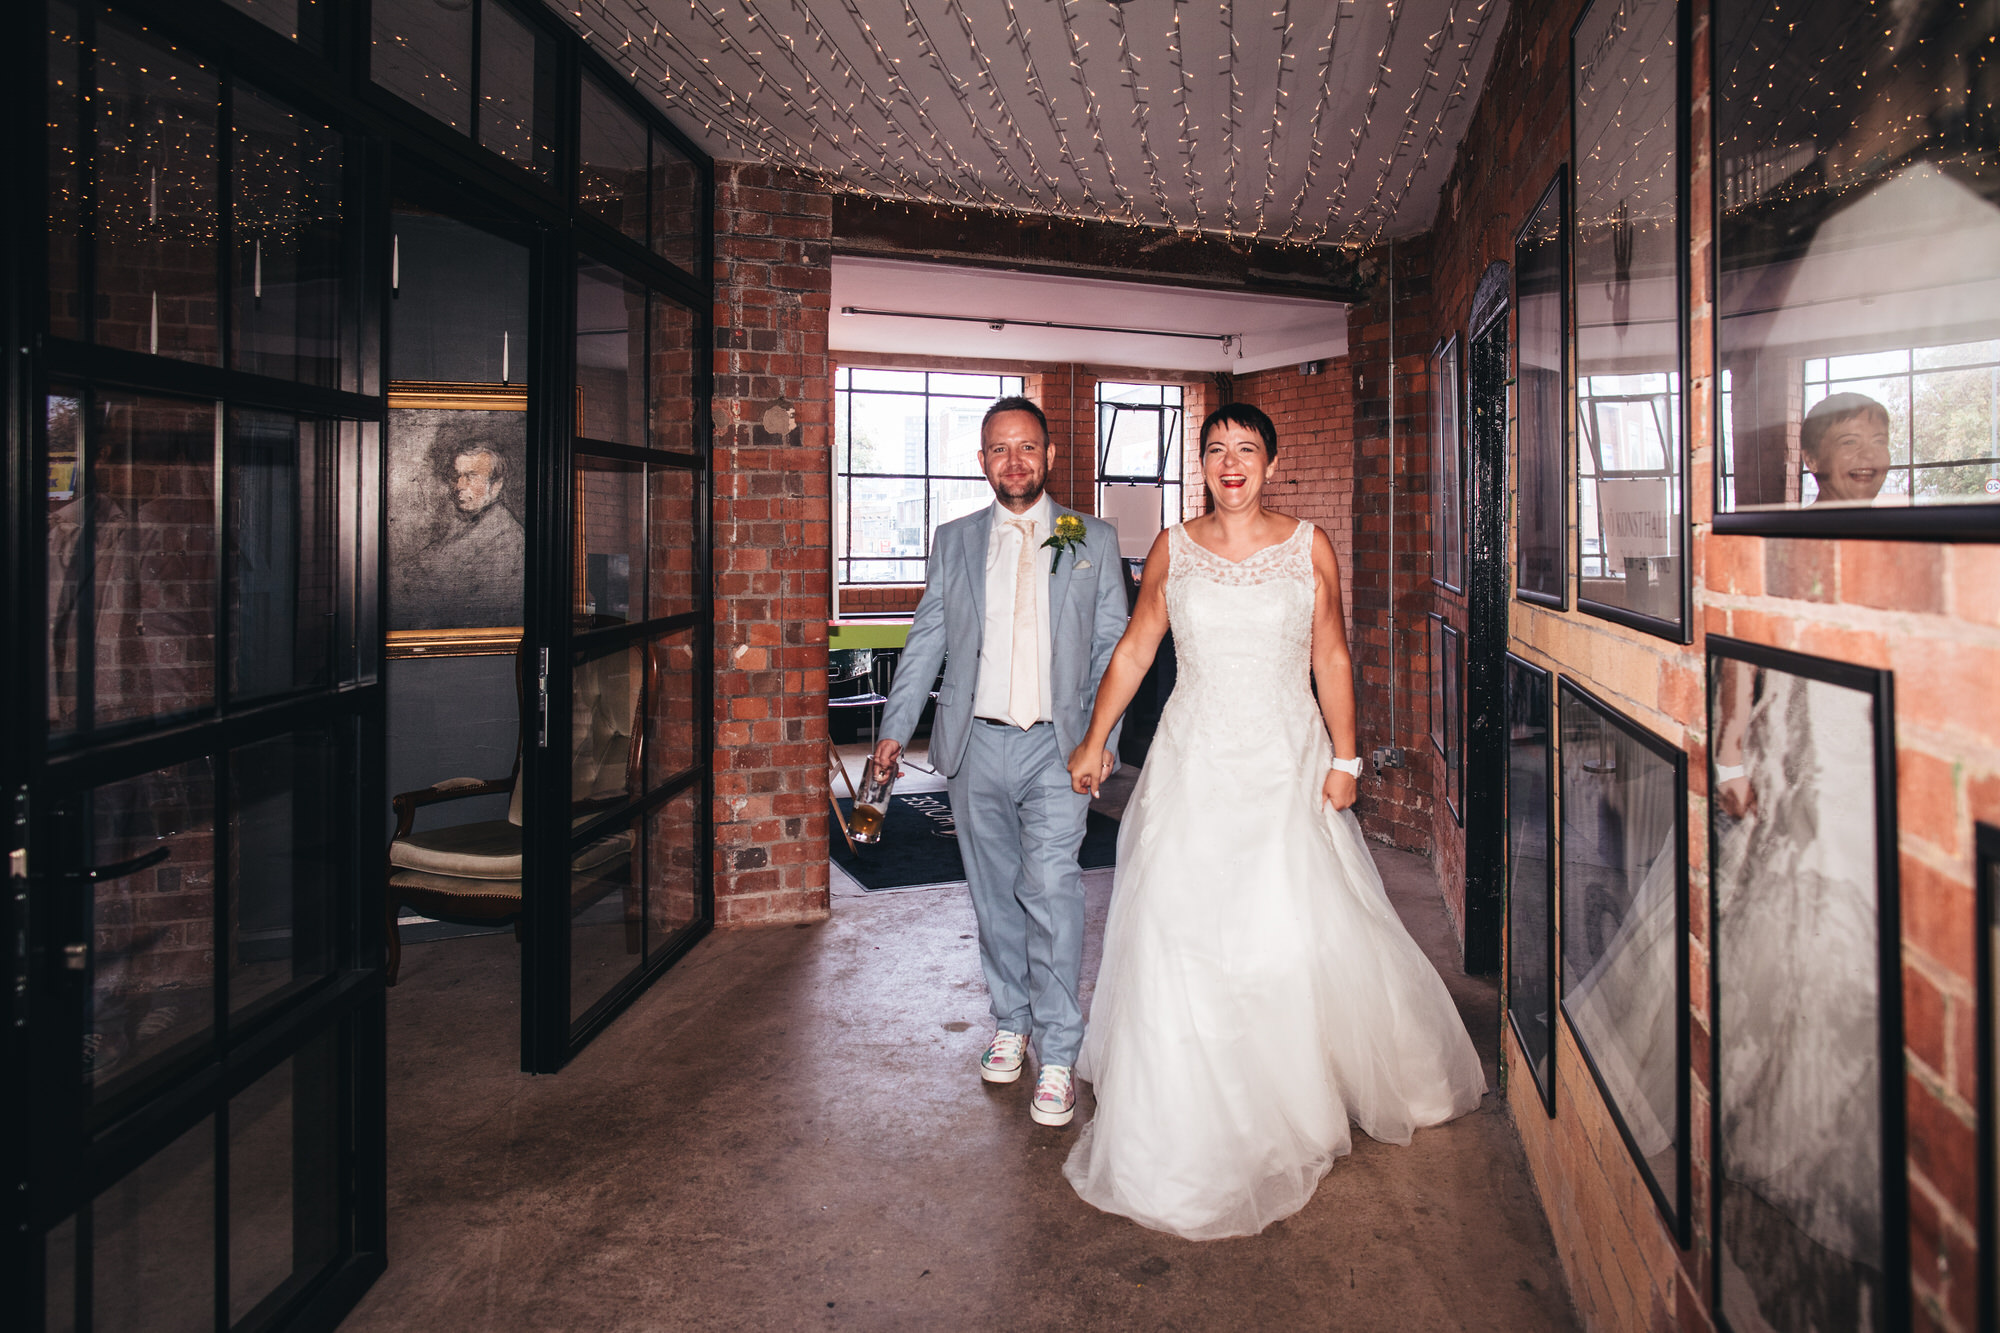 bride and groom enter venue together, announced into room